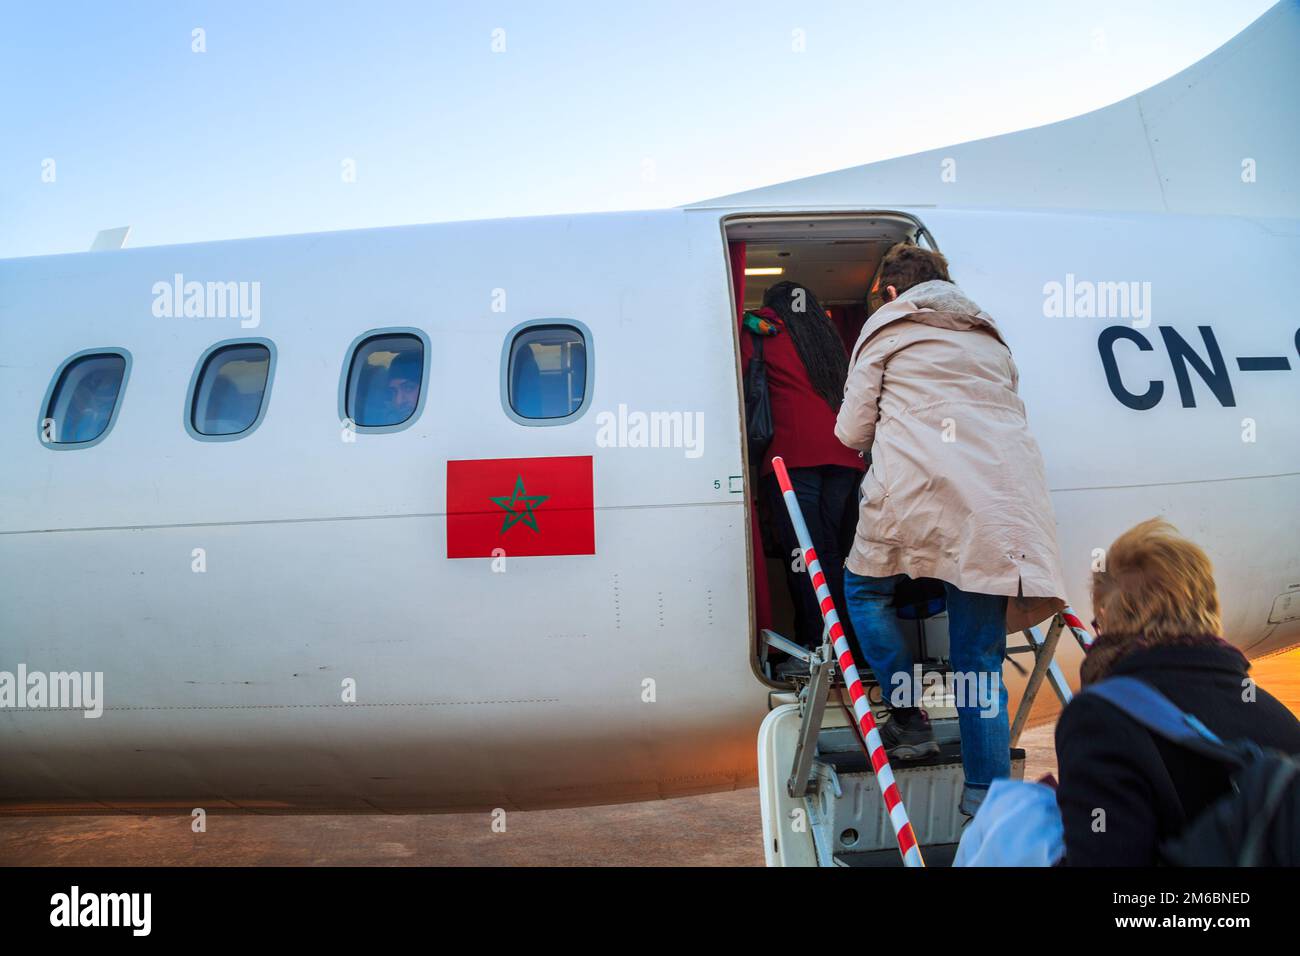 Ouarzazate, Morocco - Feb 28, 2016: passengers boarding airplane of Royal Air Morocco. People climbing ramp on background, rear Stock Photo